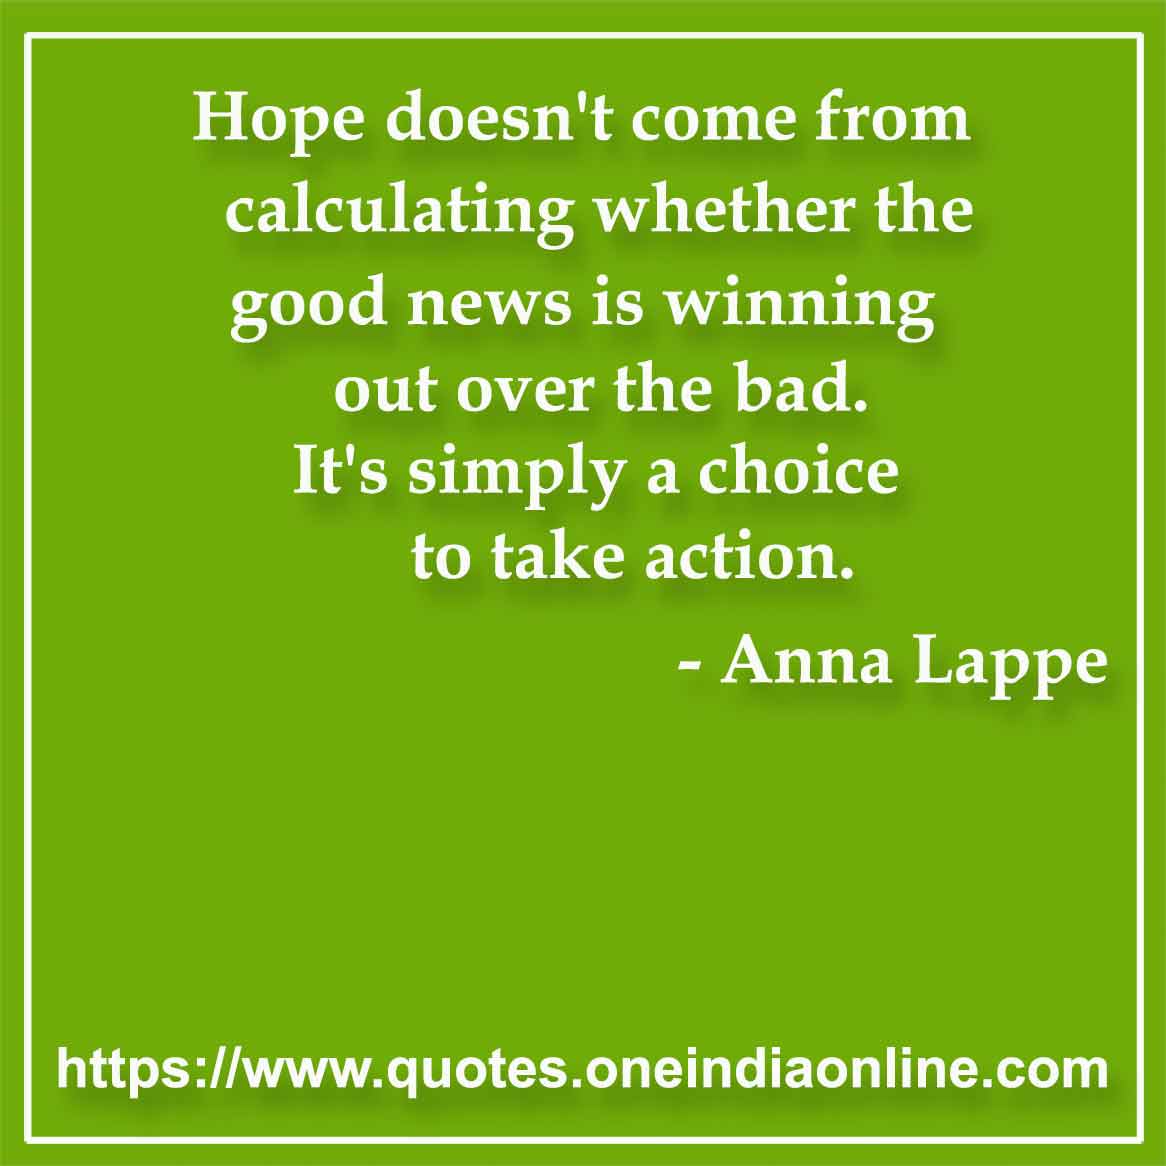 Hope doesn't come from calculating whether the good news is winning out over the bad. It's simply a choice to take action.

- Hope Quotes by Anna Lappe